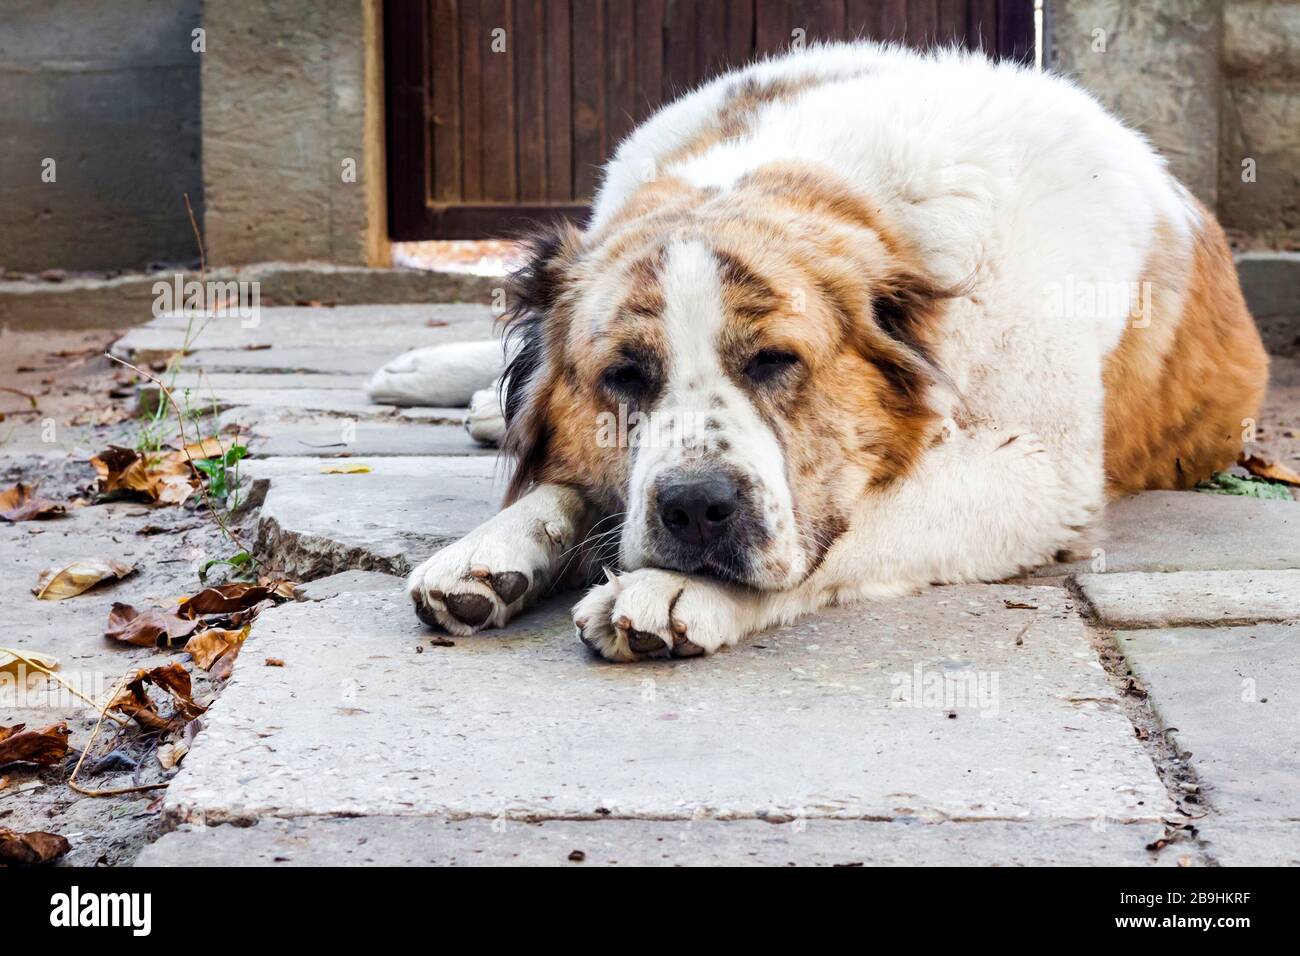 Sleeping dog resting its head on its paws. Breed Central Asian Shepherd (Alabai) Stock Photo